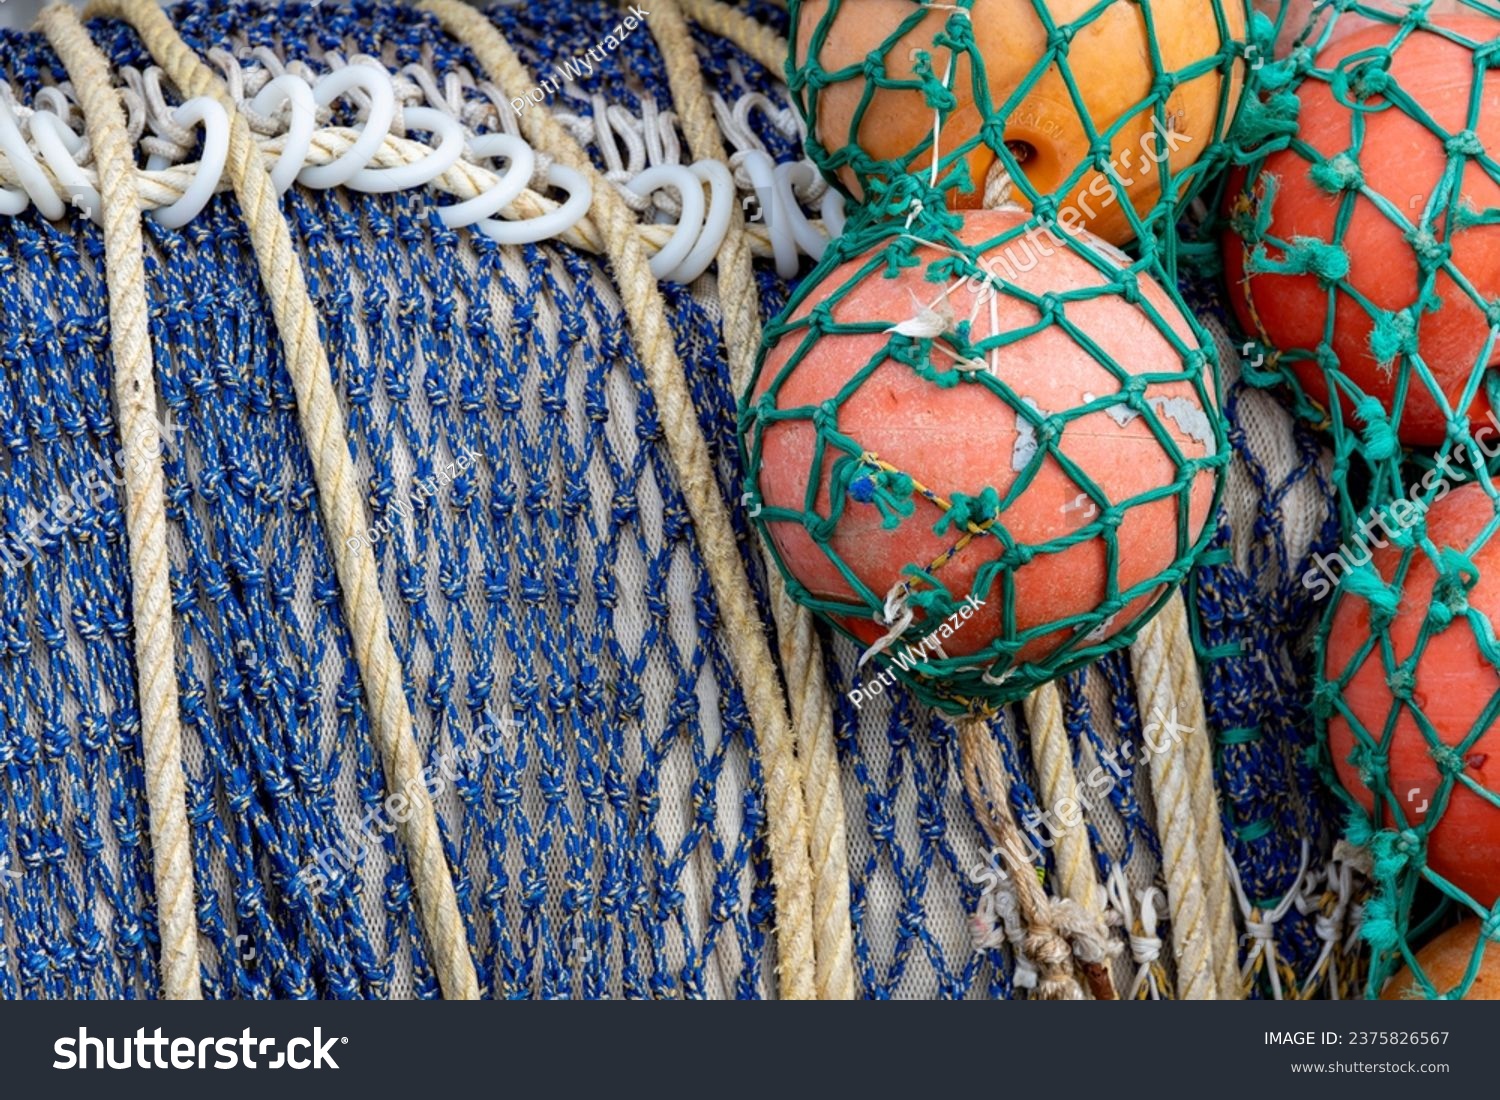 View of fishing nets rolled up on the large drum of a fishing boat. #2375826567